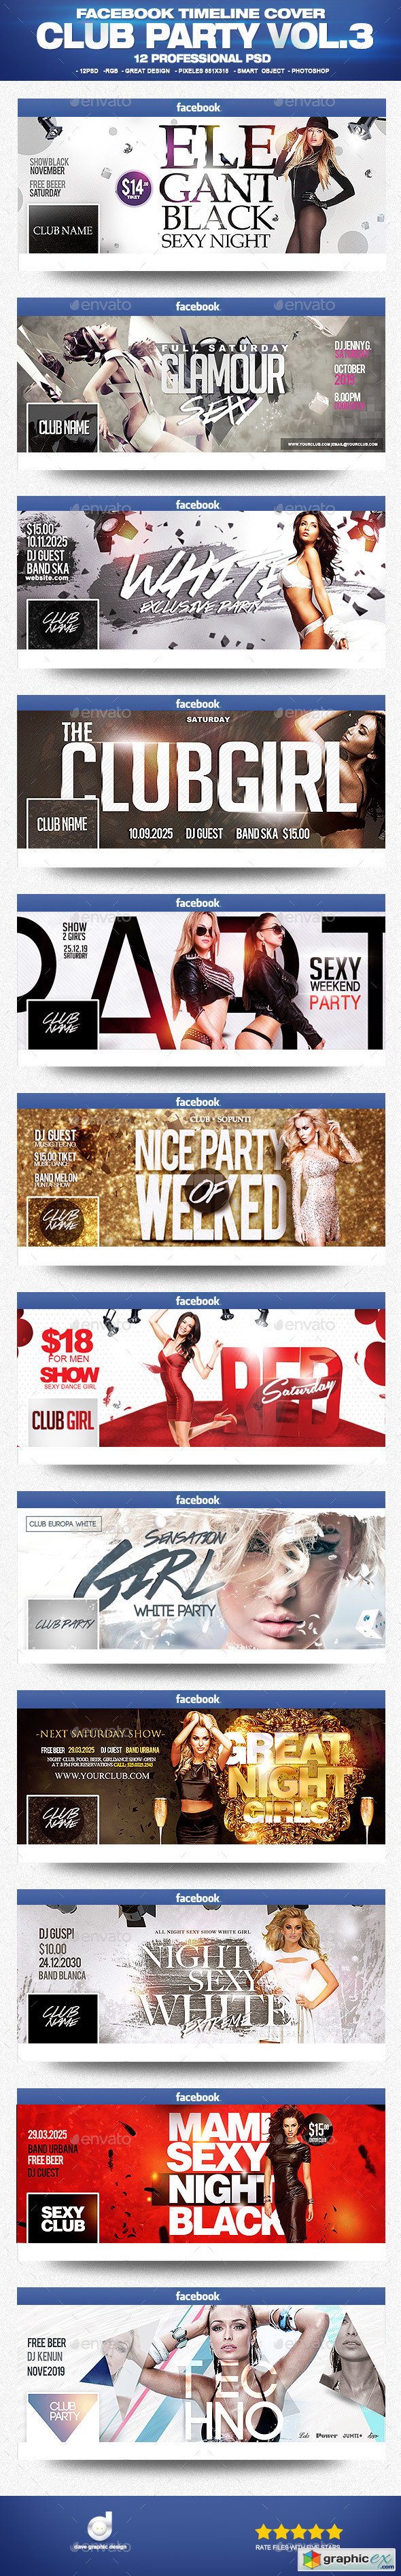 Facebook Timeline Cover Package Club Party Vol.3